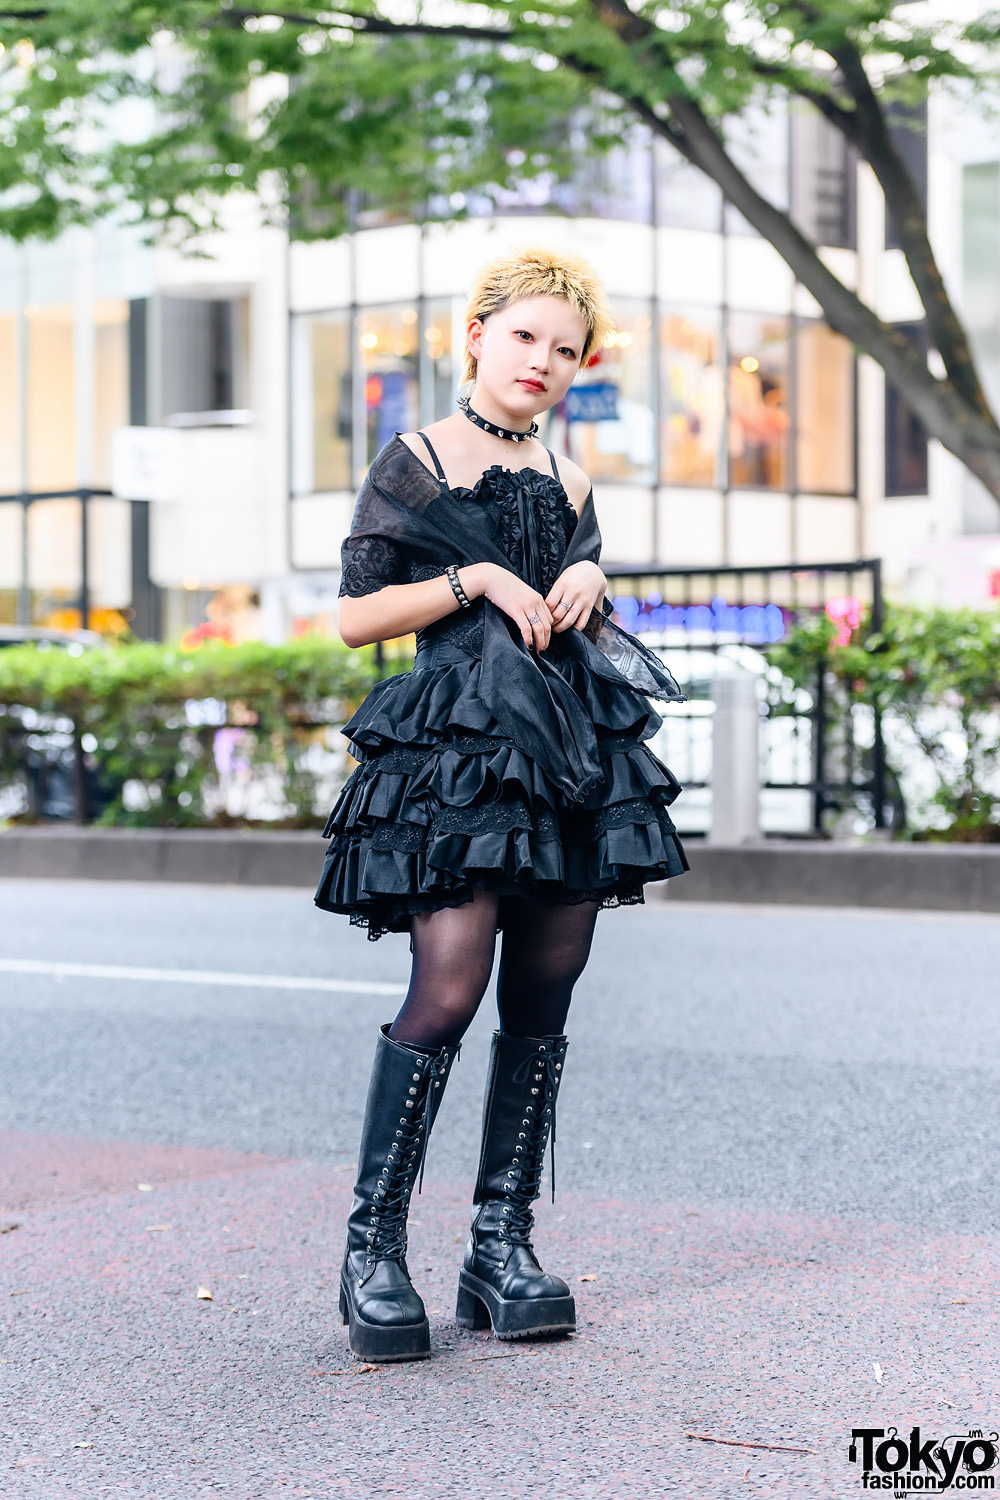 Gothic Grunge Tokyo Style w/ Cropped Hair, Spiked Choker, Tiered